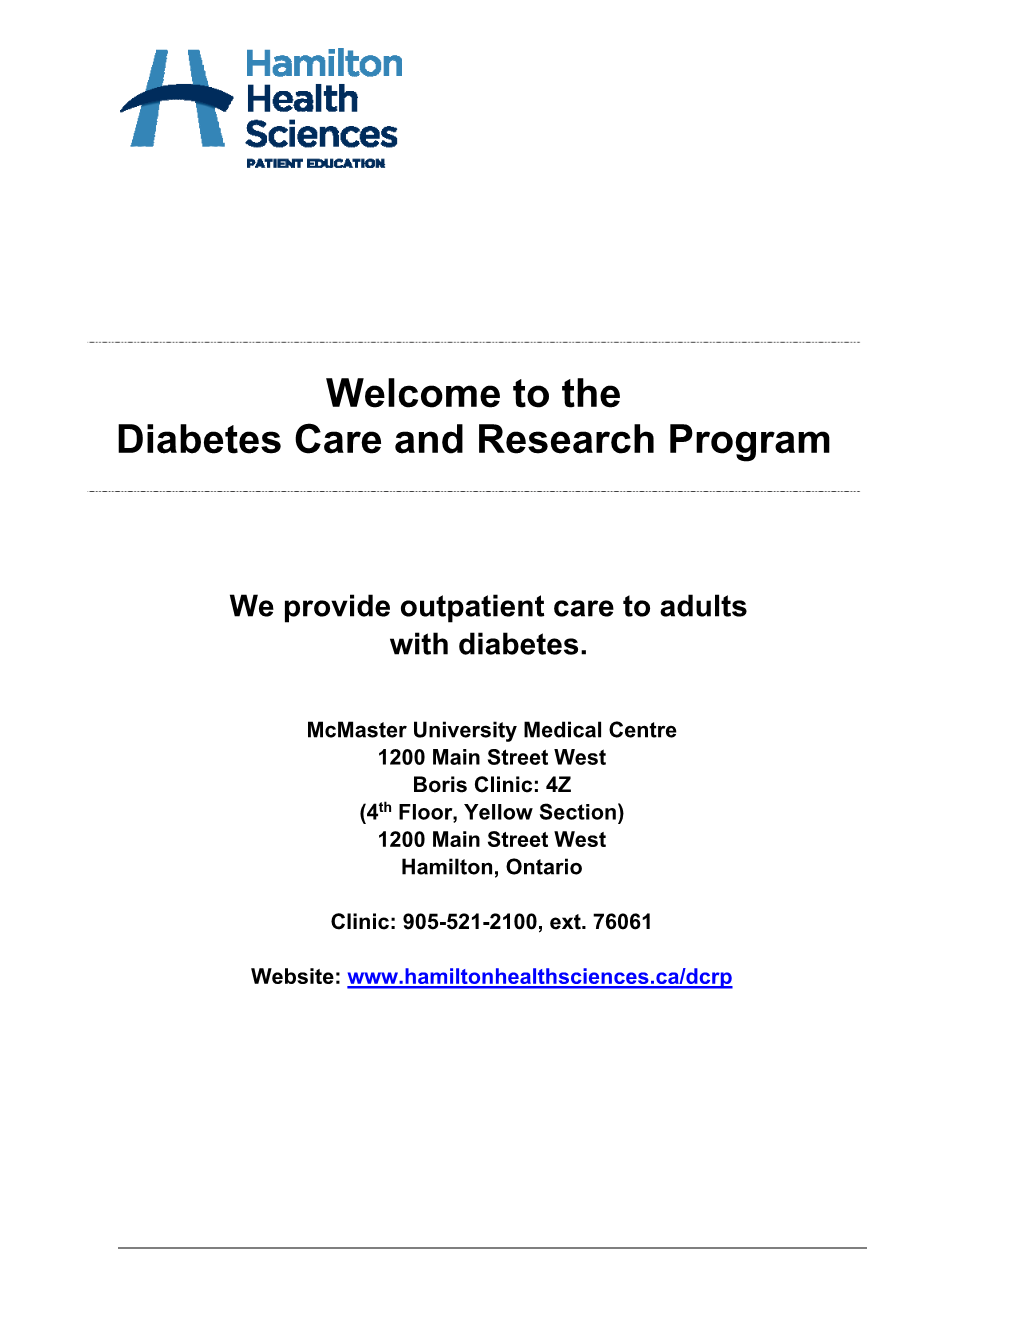 Diabetes Care and Research Program; Welcome